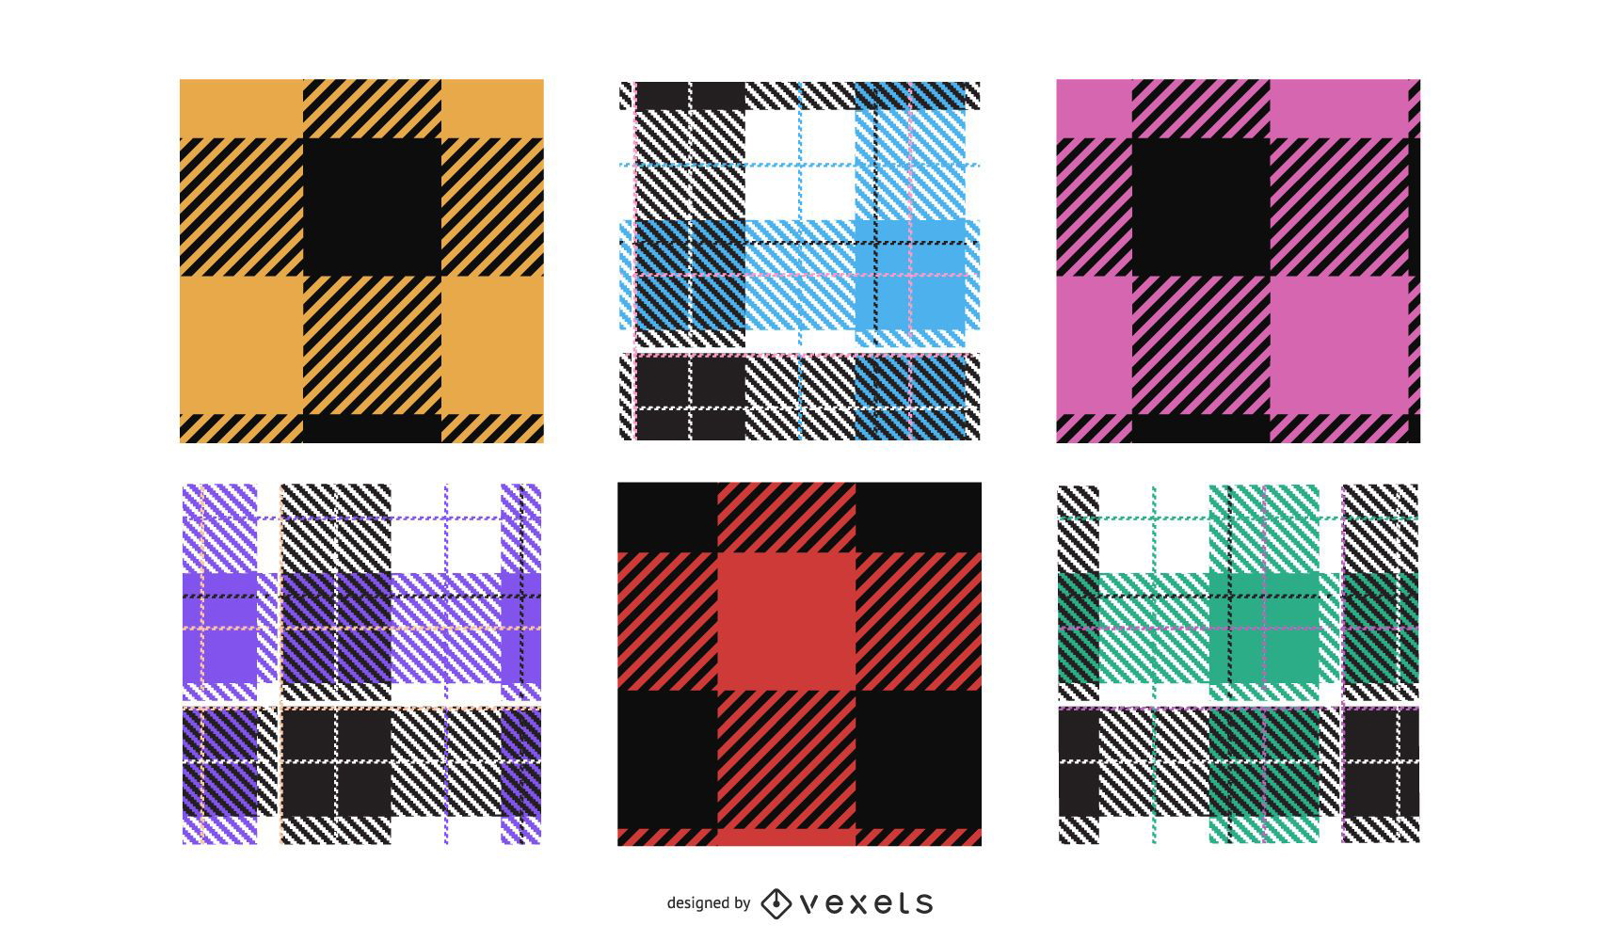 Clothing Items Vector Set Vector Download